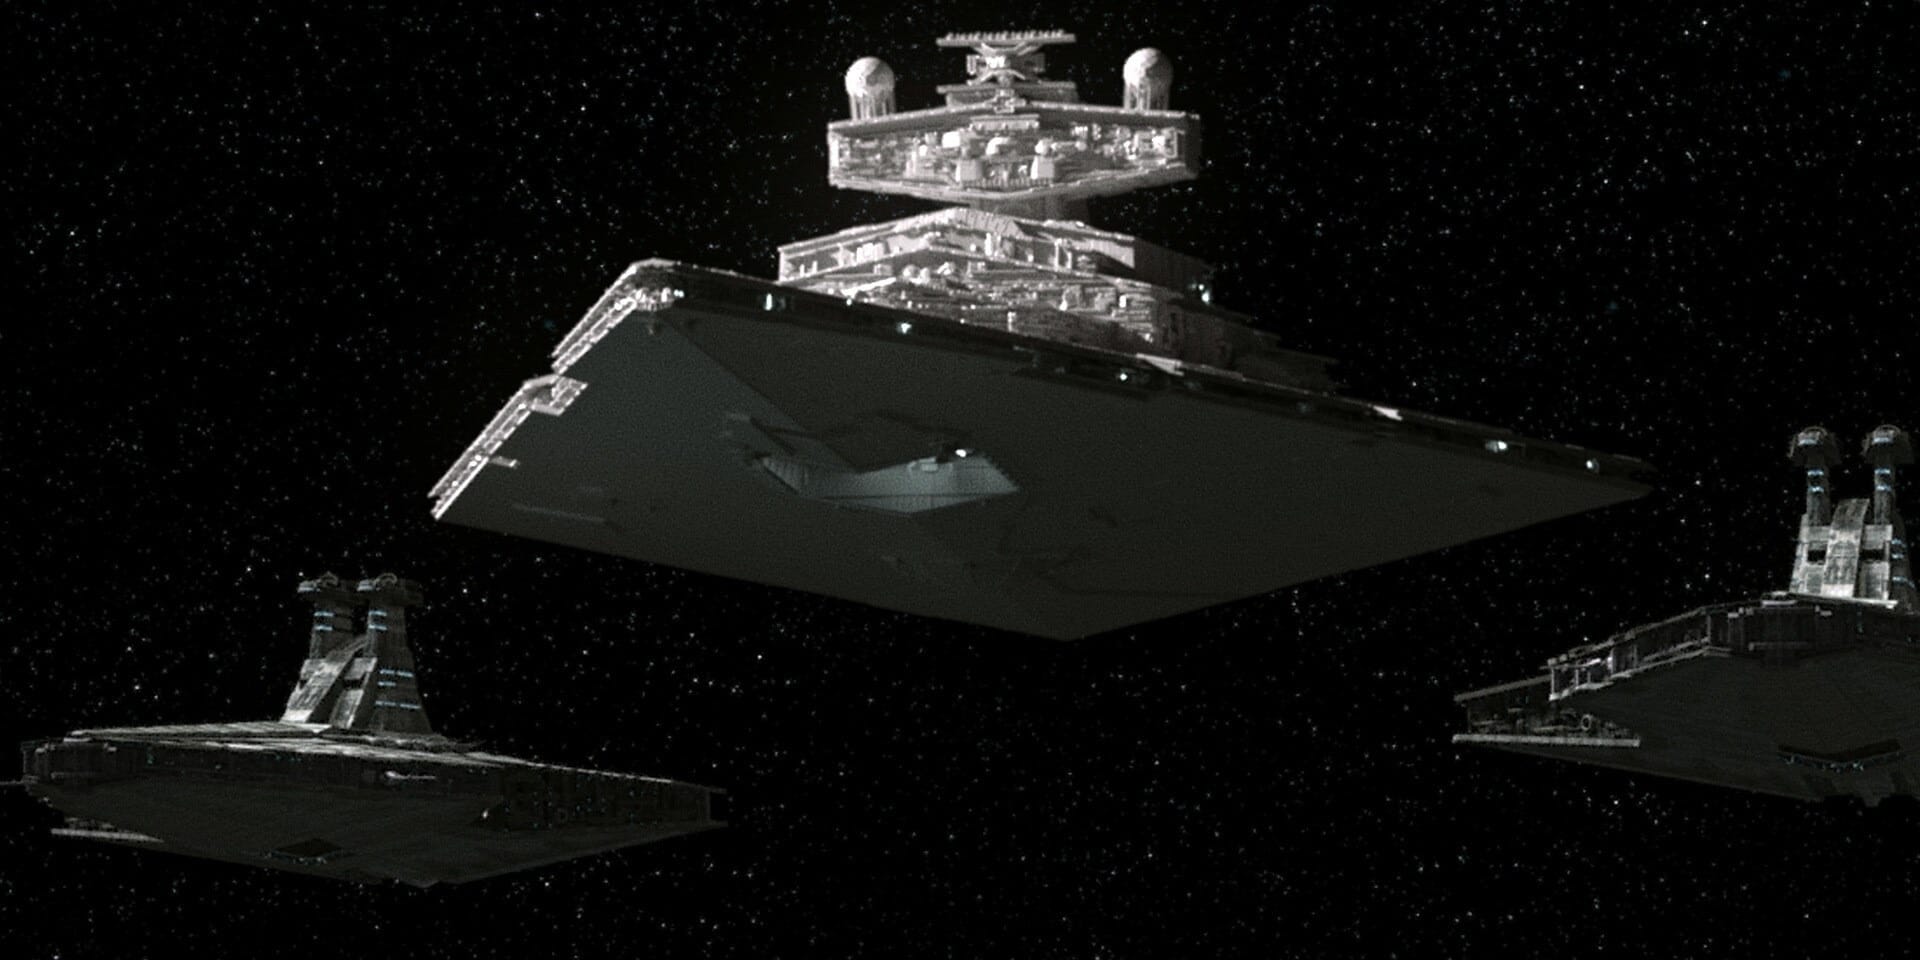 Tarkin’s arrival at the Tantiss facility includes an Imperial Star Destroyer accompanied by two Venator Star Destroyers. This is the first appearance of the classic Imperial-class ship in Star Wars: The Bad Batch and further shows the transition of the Republic military into the Imperial military of the original trilogy. 